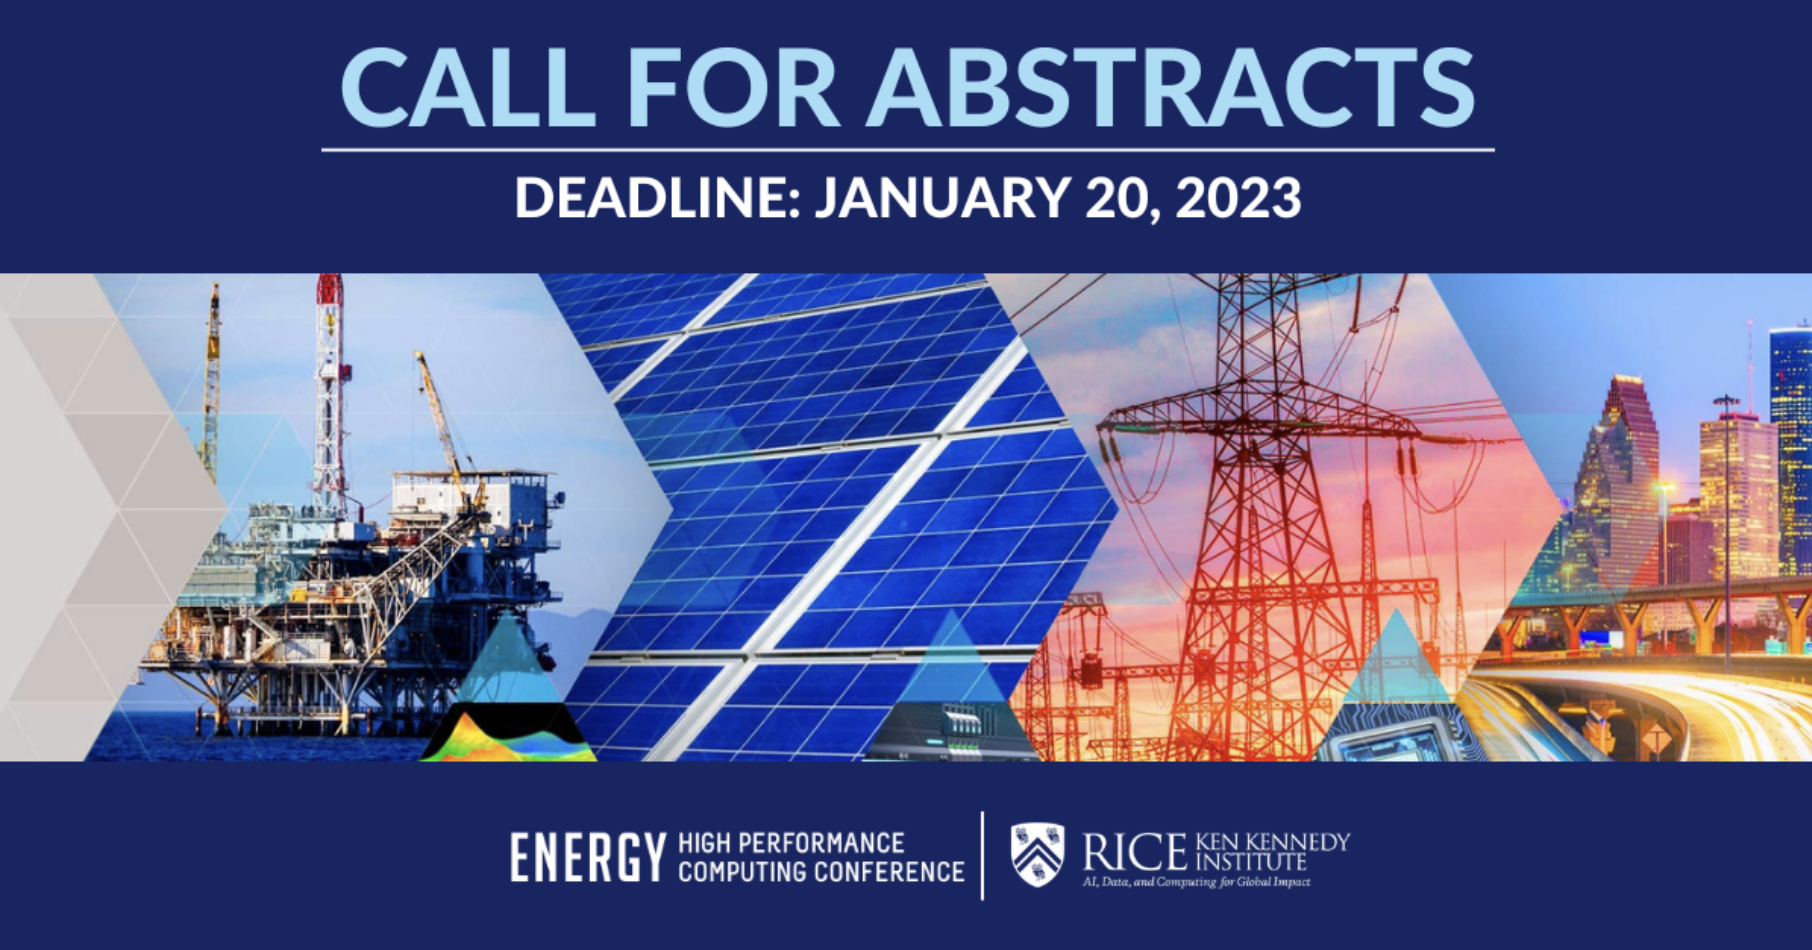 Registration Now Open for 2023 Energy HPC Conference